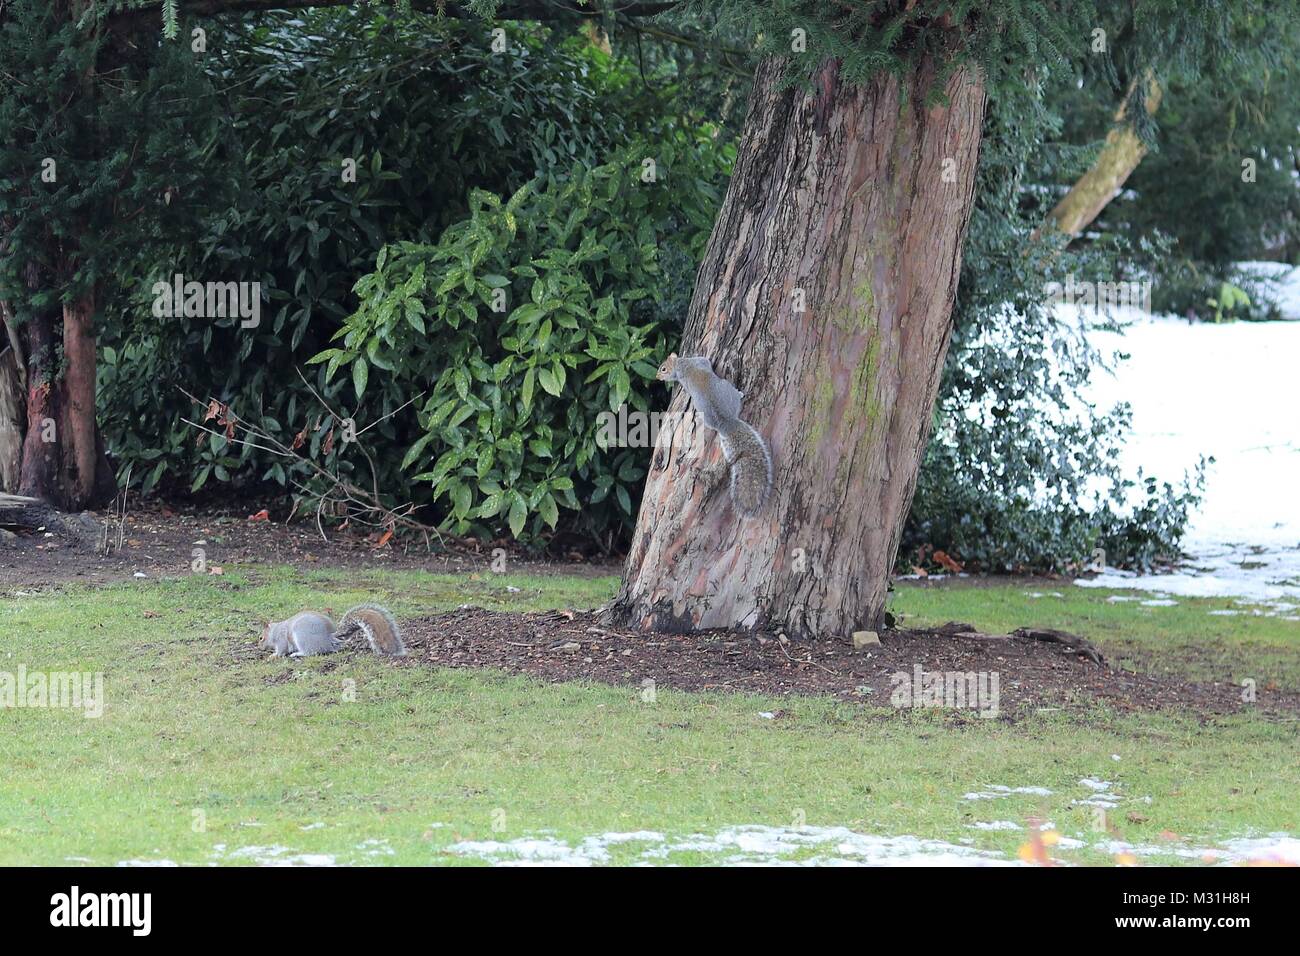 Grey squirrels on and around tree with snow on ground Stock Photo